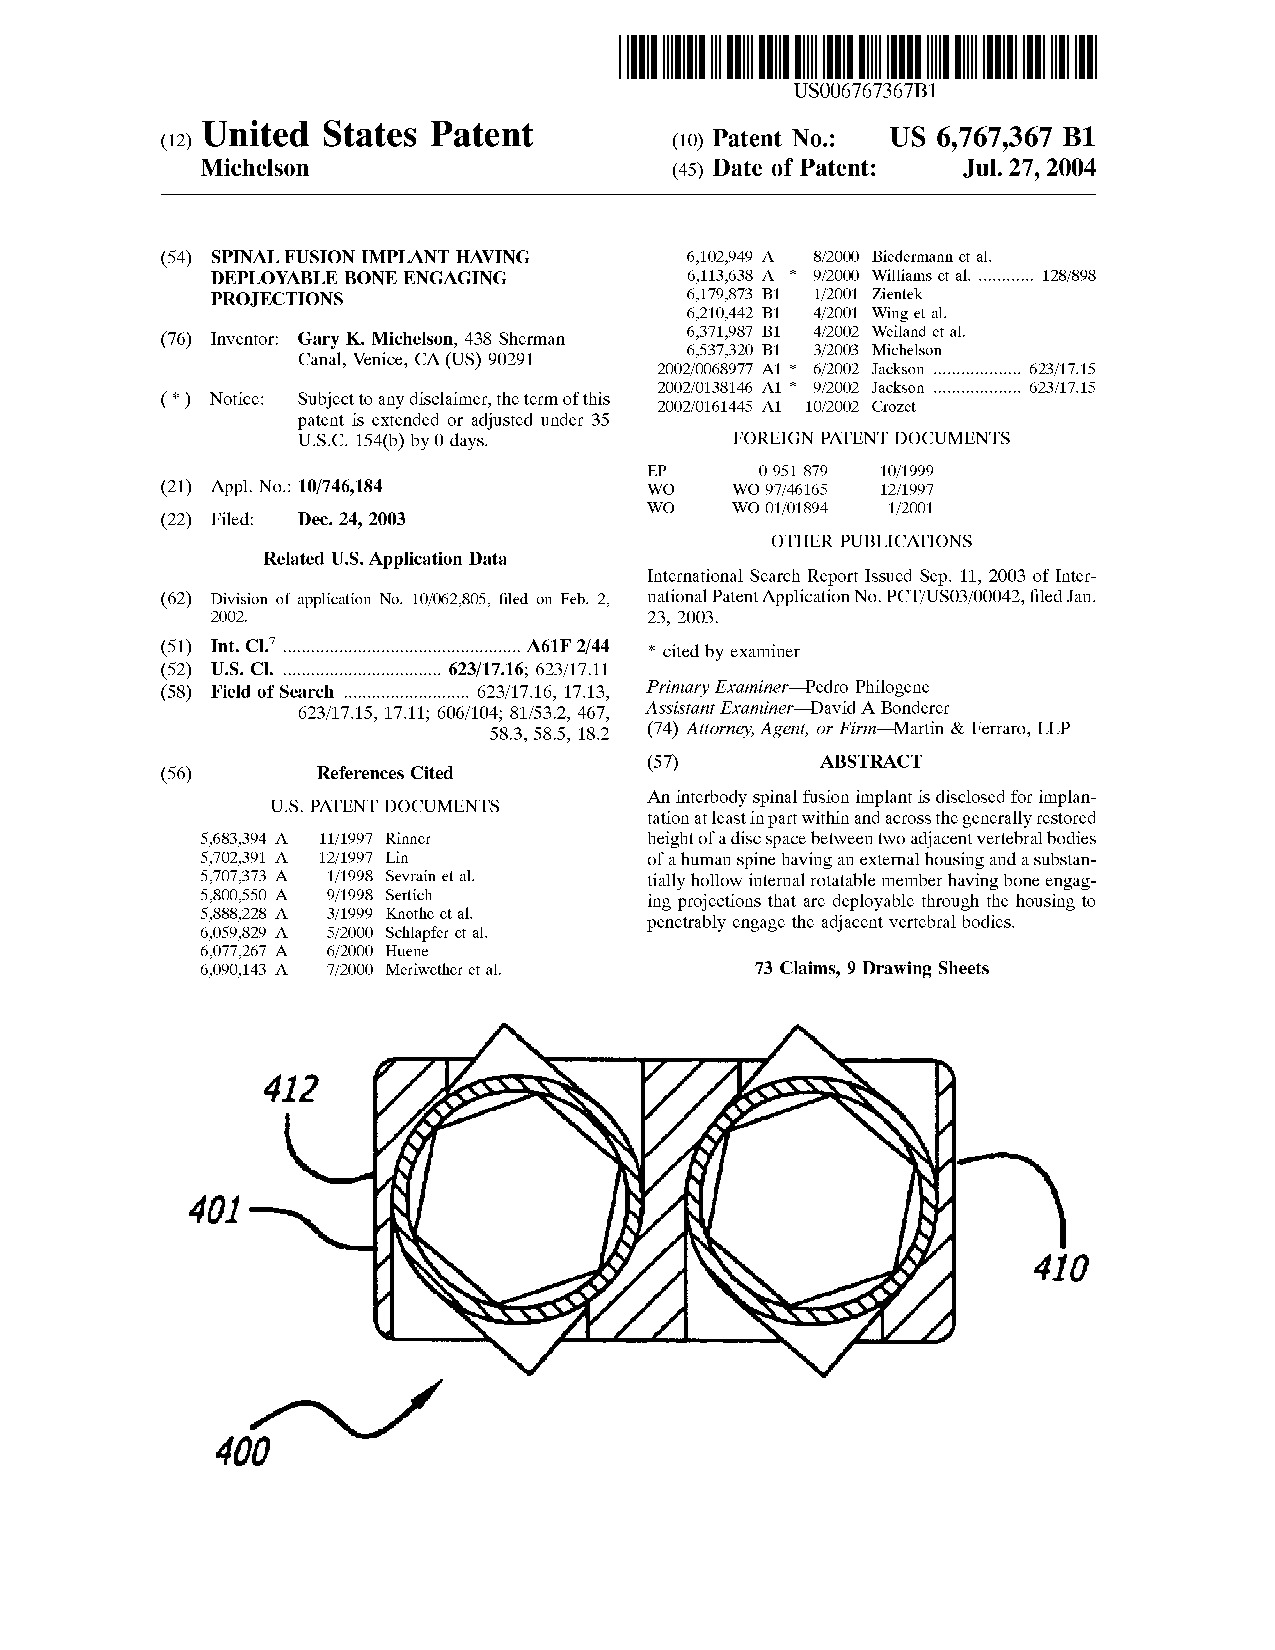 Spinal fusion implant having deployable bone engaging projections - Patent 6,767,367